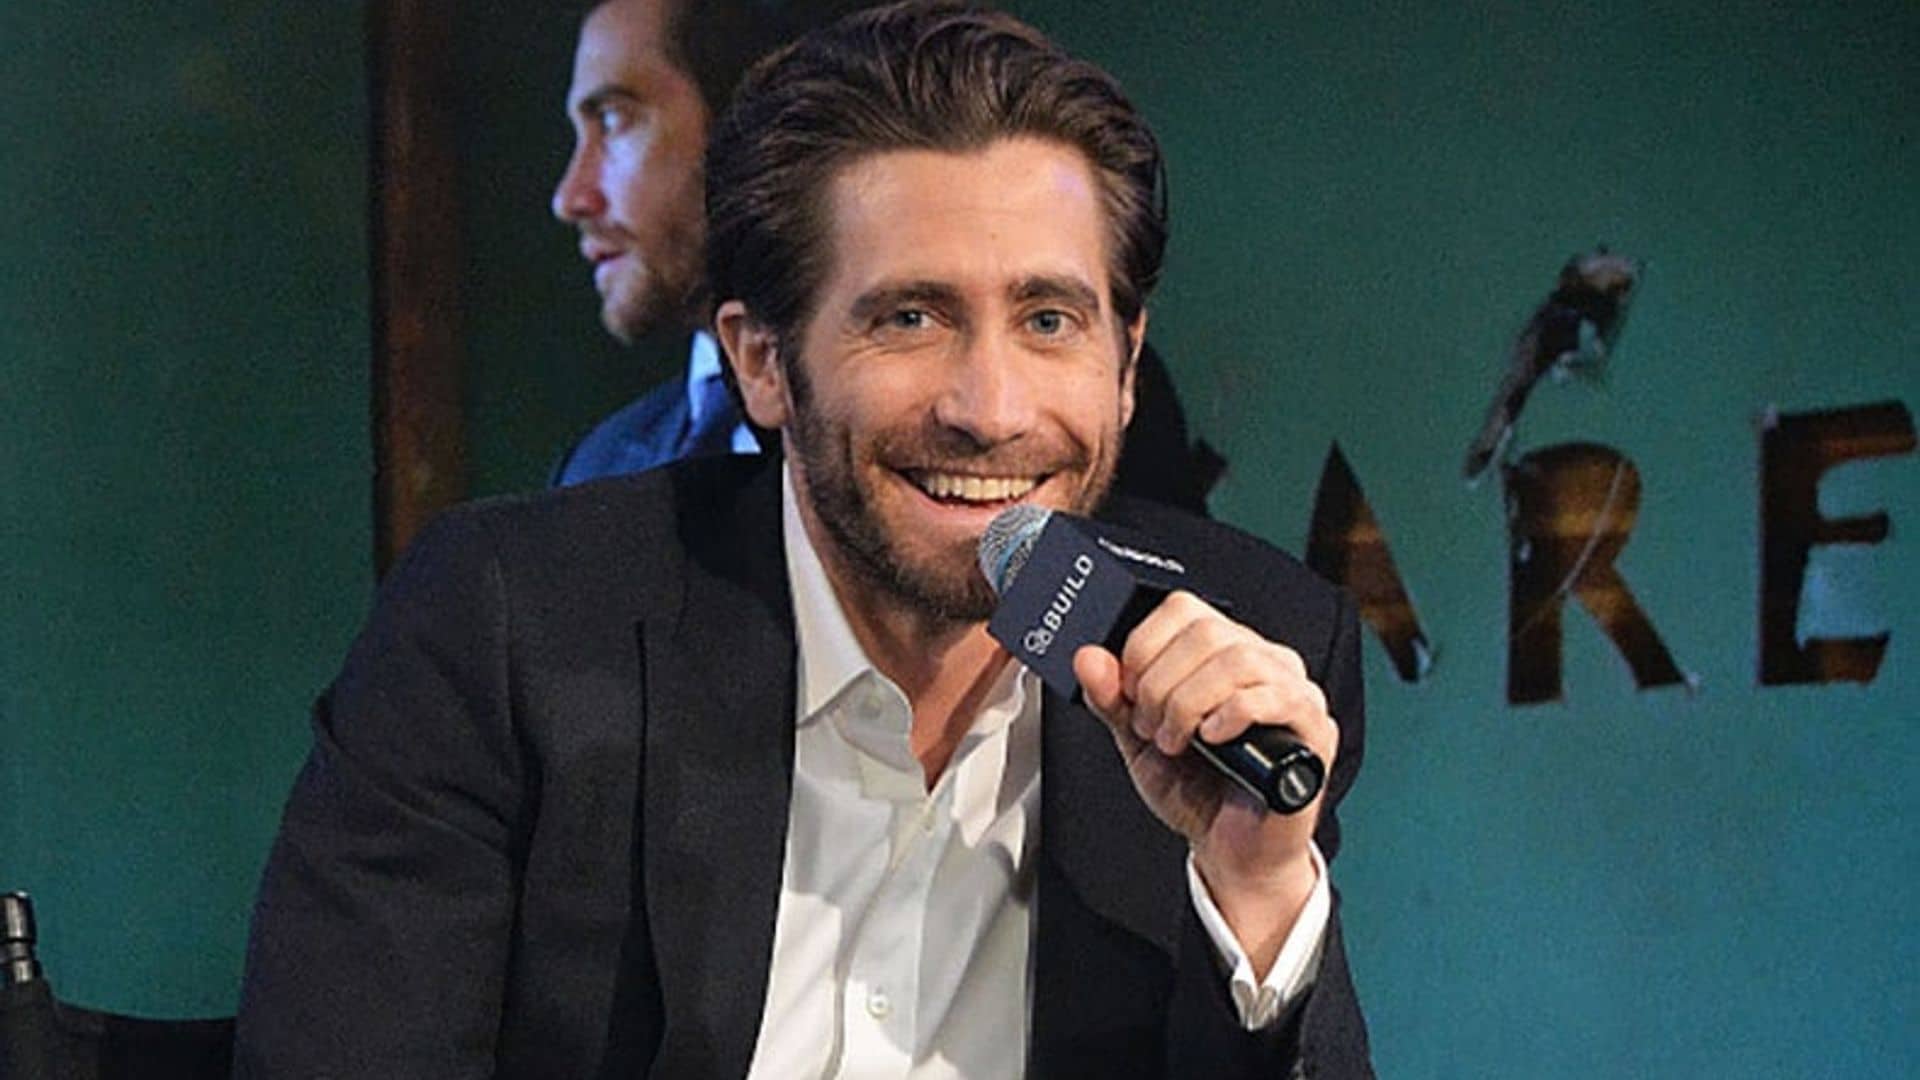 Jake Gyllenhaal says his dance moves will make you 'nauseous'